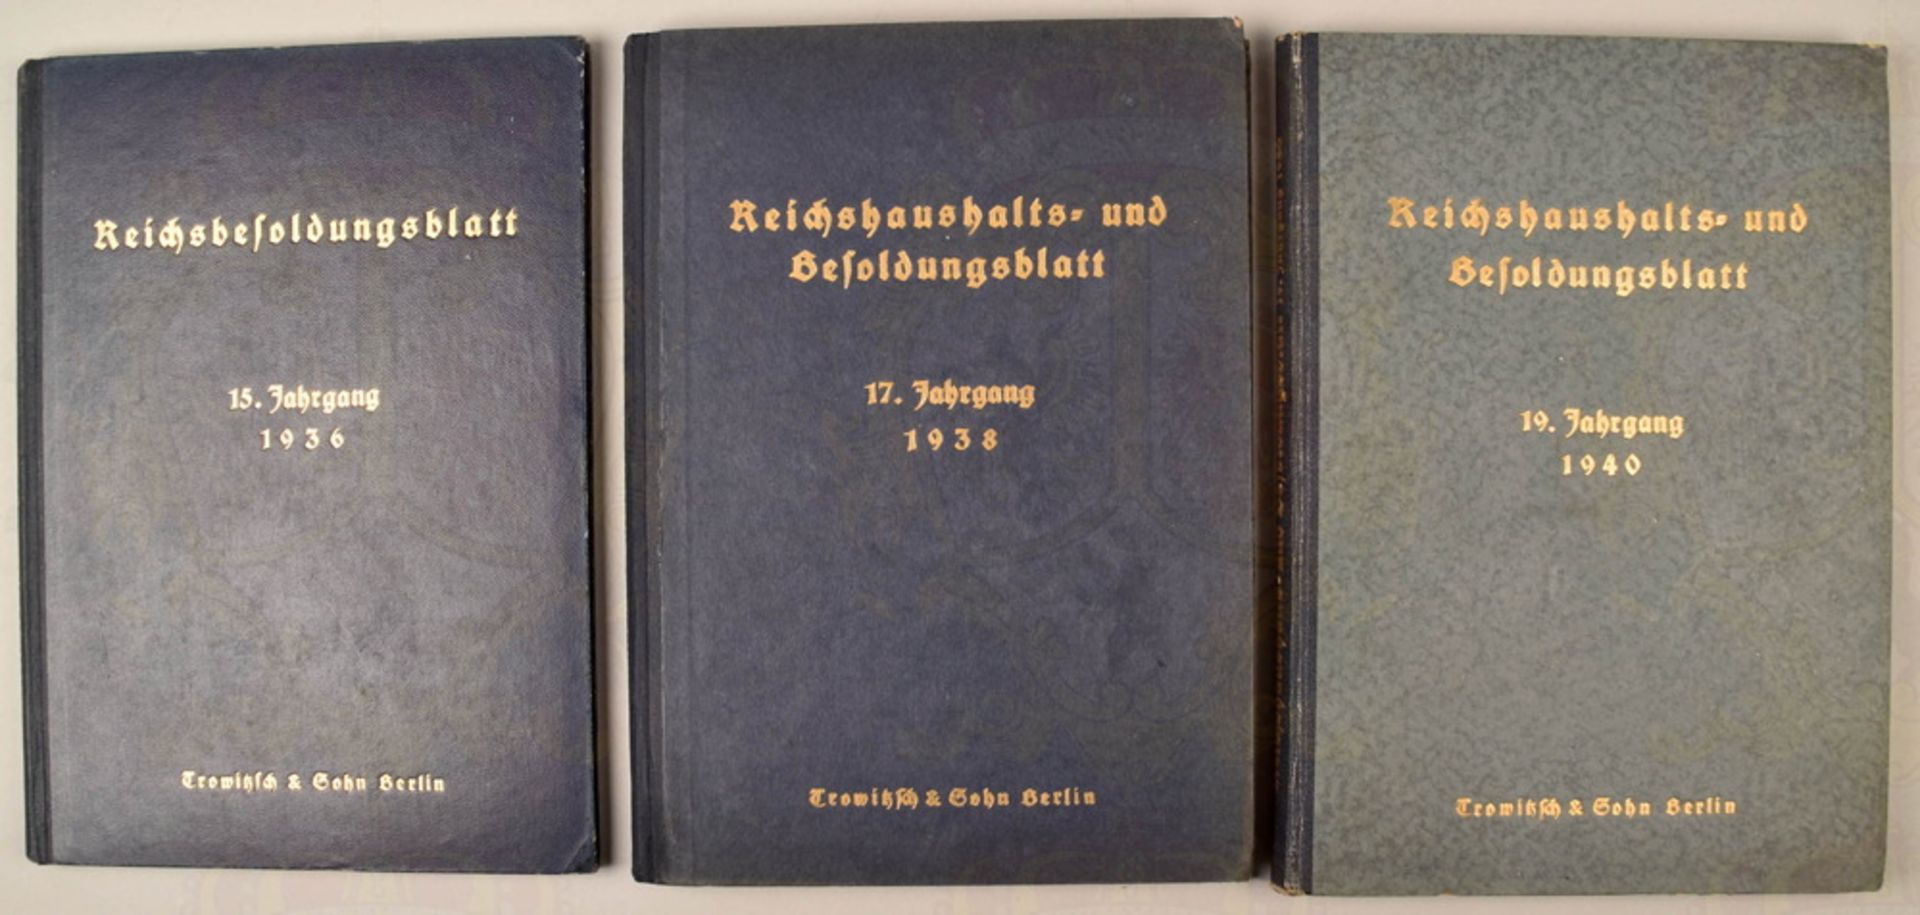 Collection of regulations on military salary and Reichs budget 1936-1940